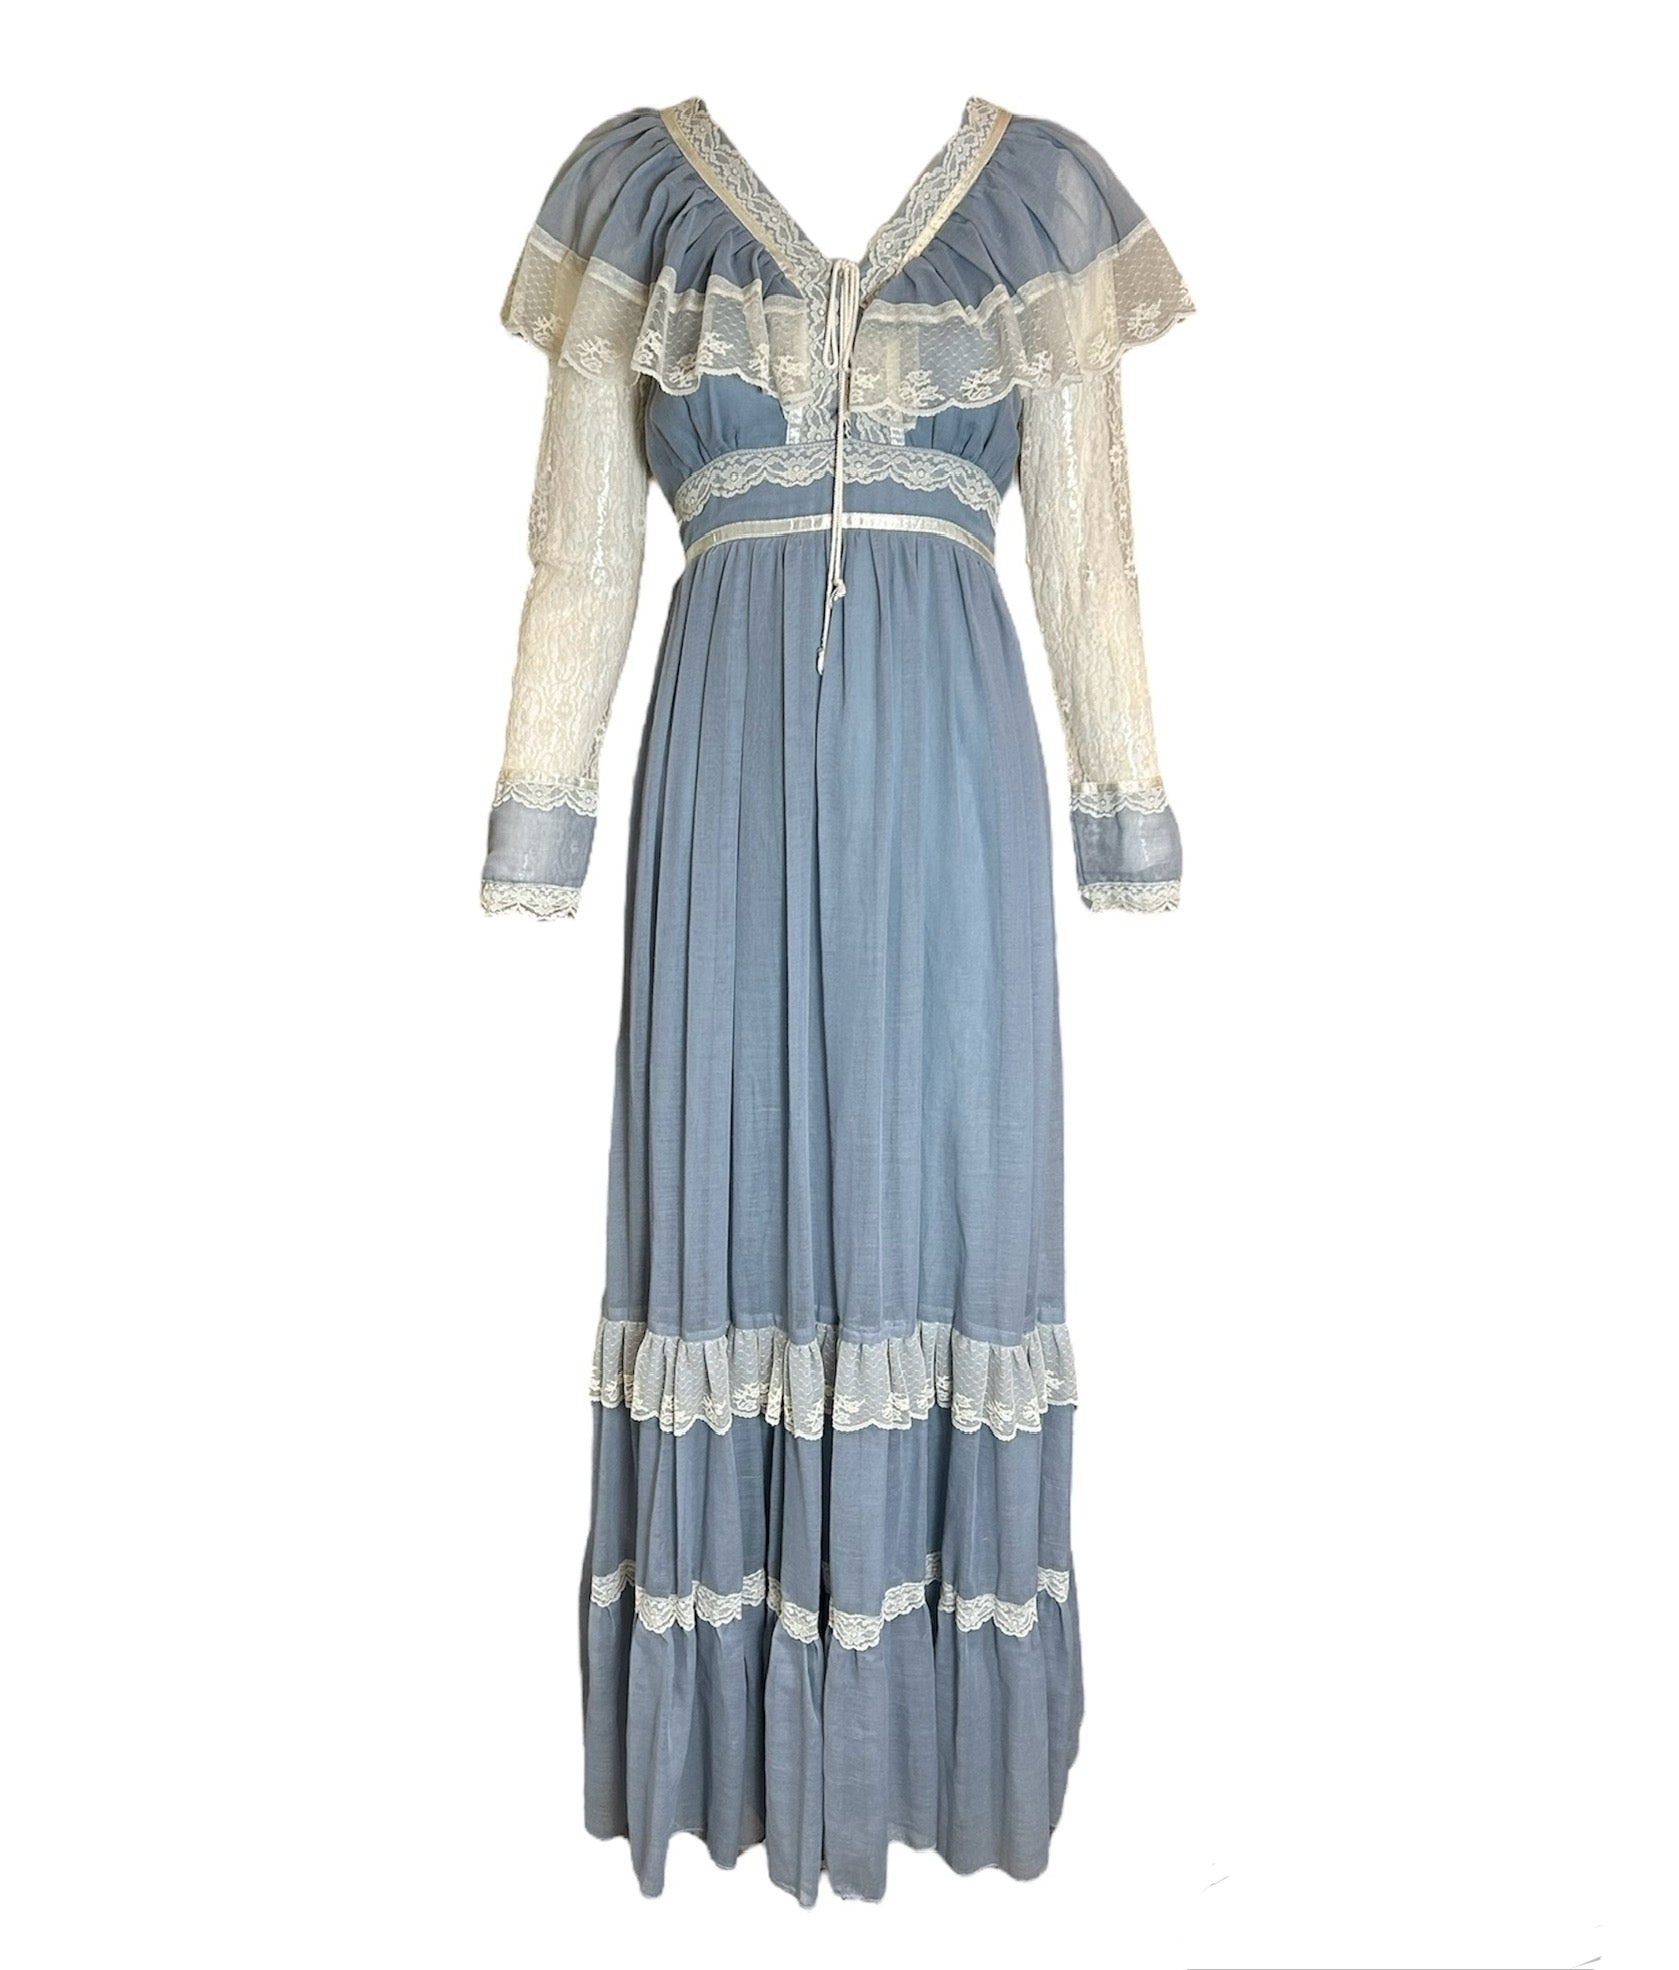 Gunne Sax 1970s Baby Blue Lace Maxi Dress FRONT PHOTO 1 OF 5